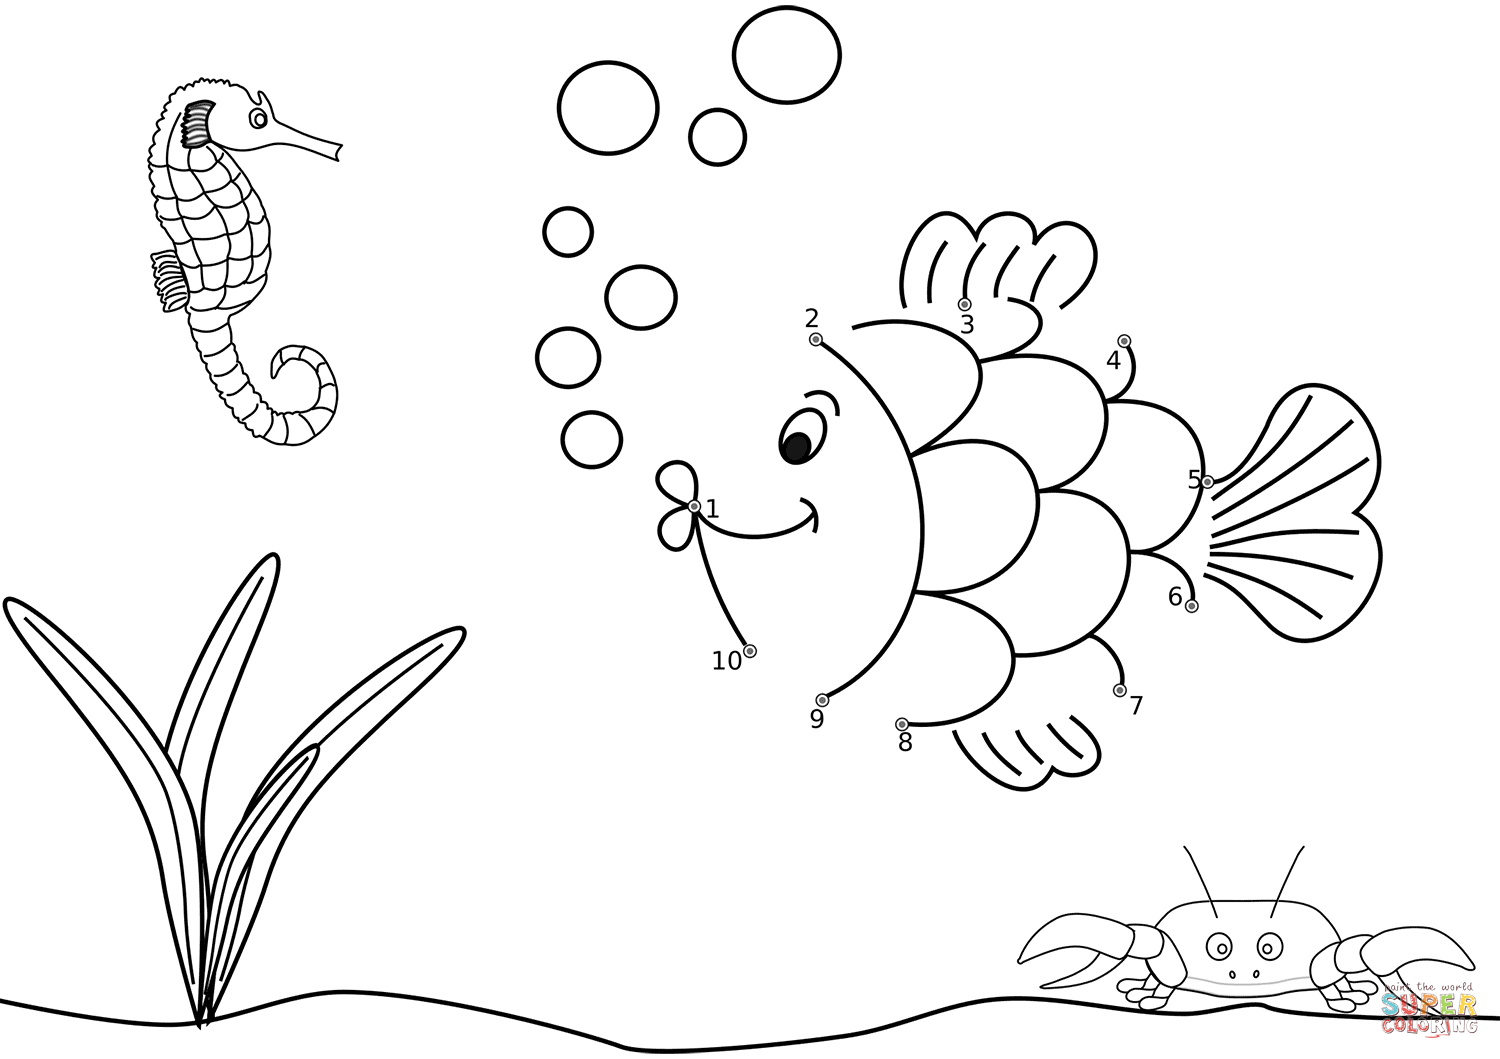 Fish in the ocean dot to dot free printable coloring pages